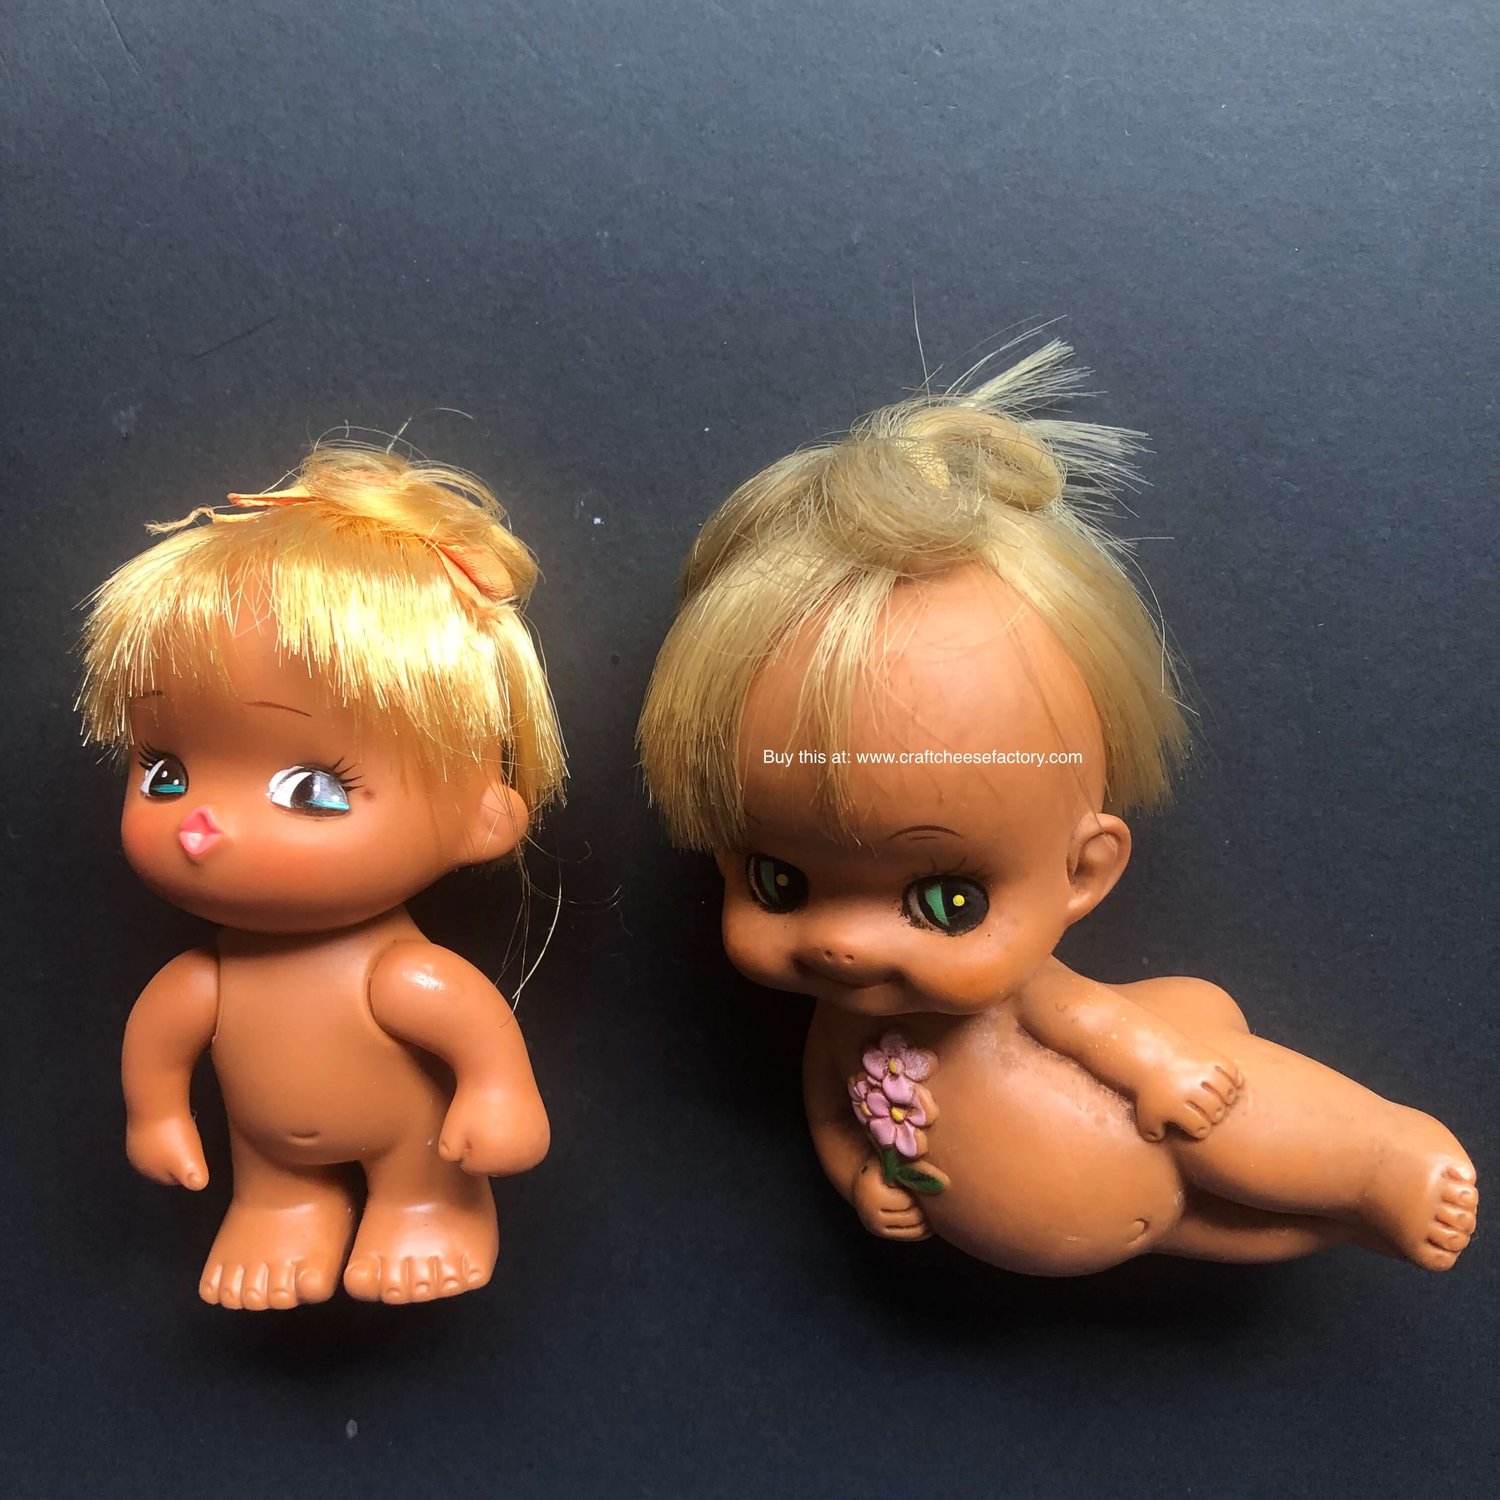 1500px x 1500px - Vintage Japan Tanned Brown Skin Blonde Girl Sexy Nude Naked Dolls â€”  Craftcheesefactory.com